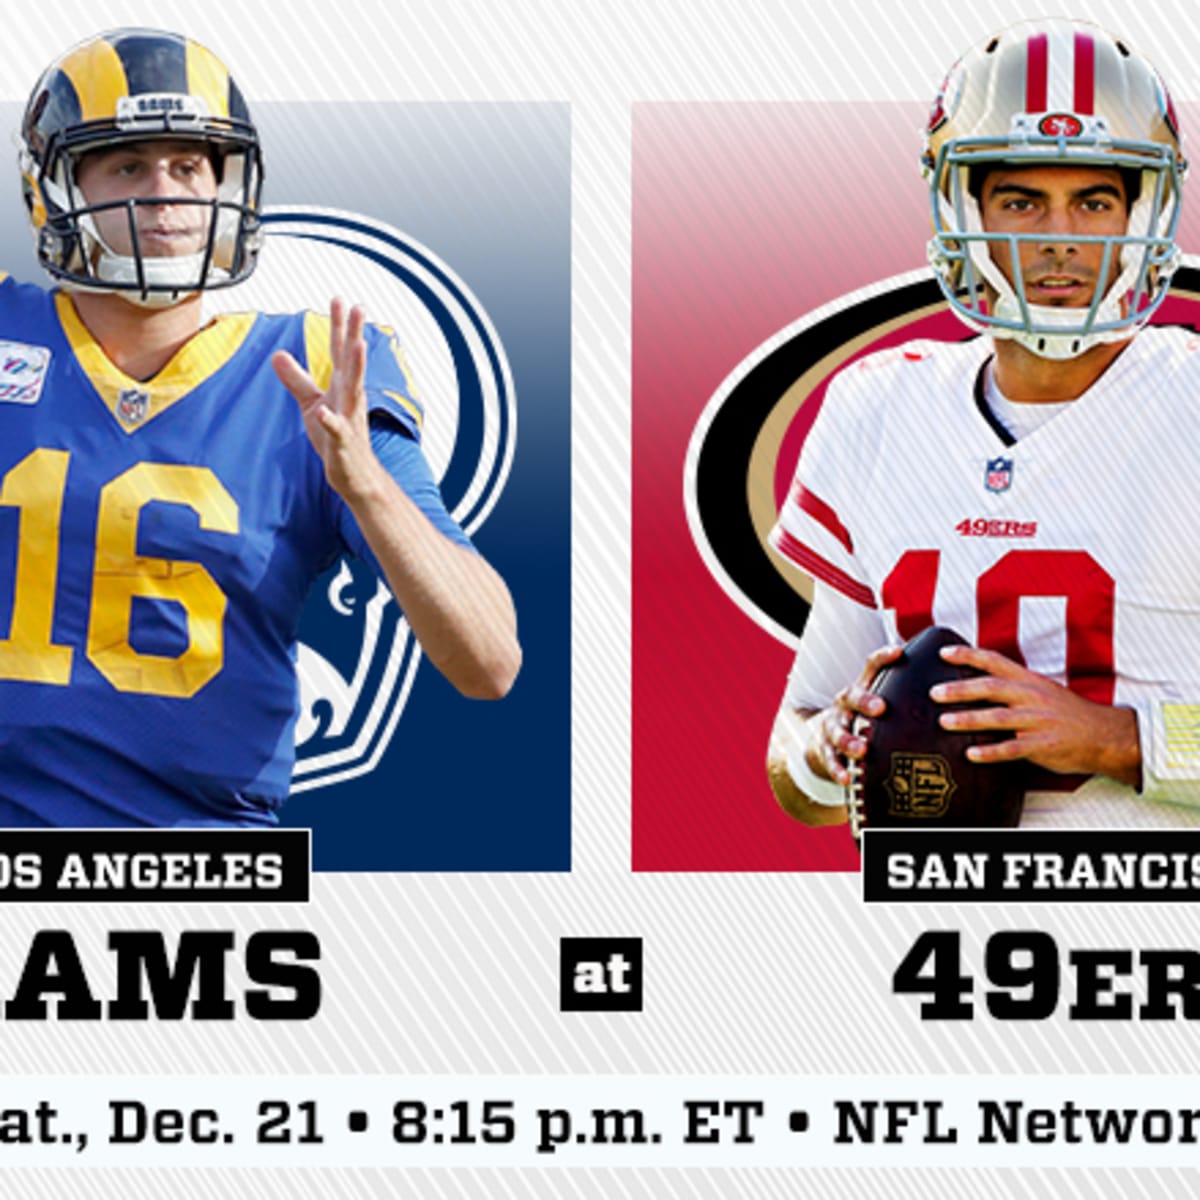 where is the rams vs 49ers game